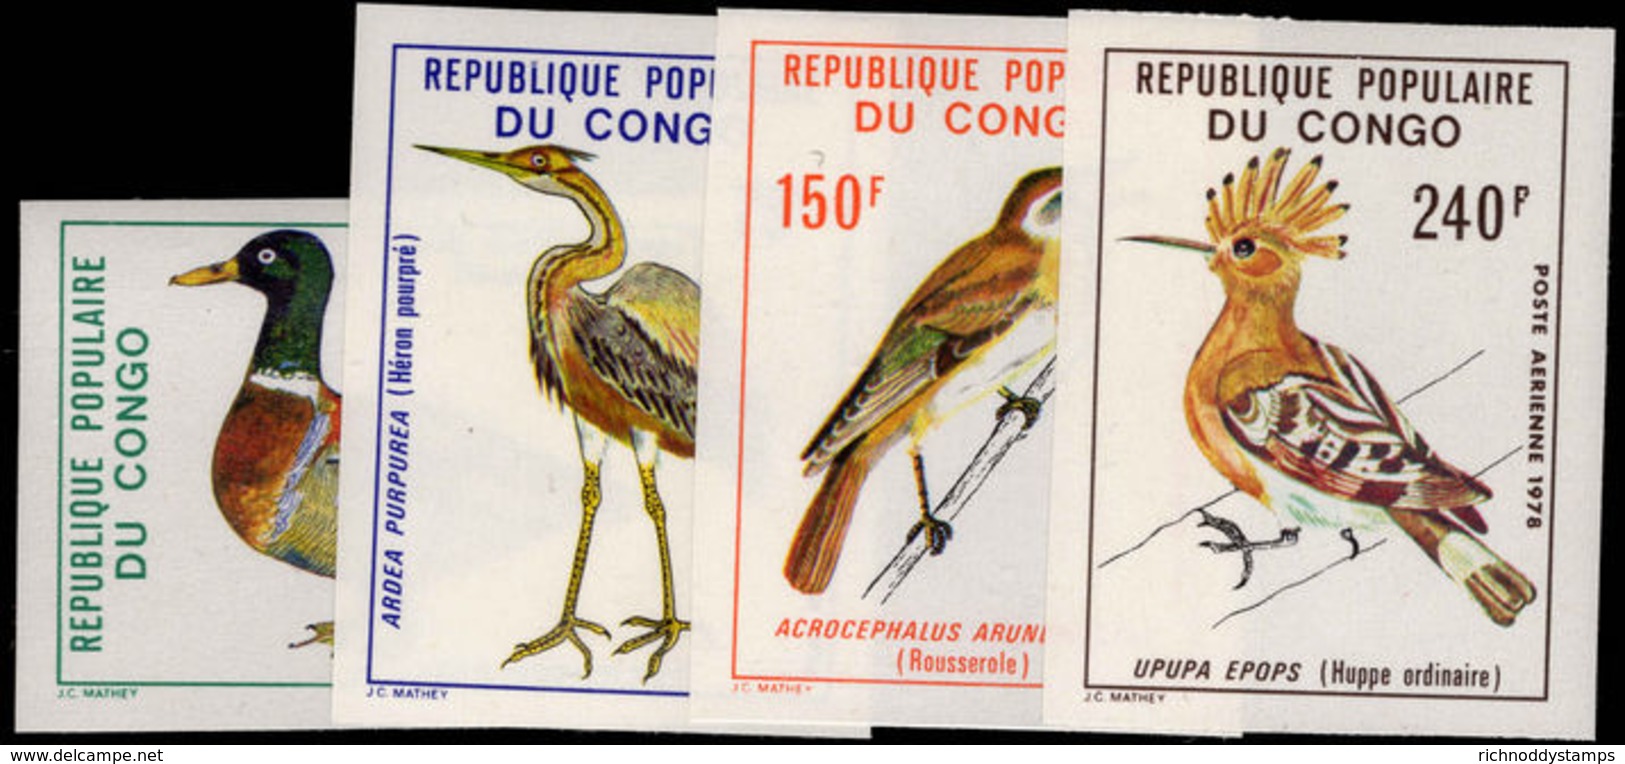 Congo Brazzaville 1978 Birds Imperf Unmounted Mint. - Mint/hinged